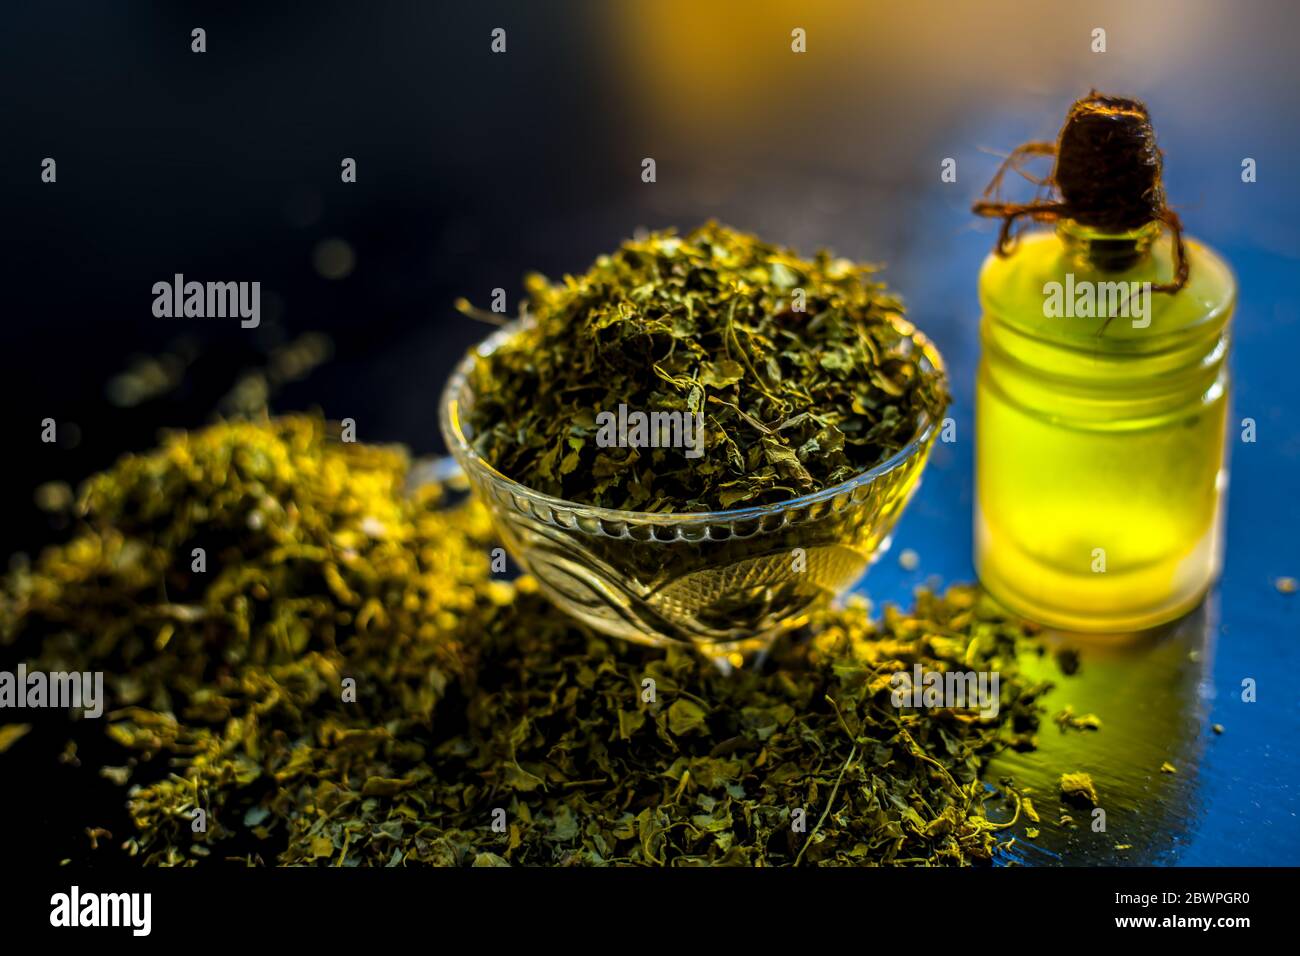 Shot of essential oil of Kasuri Methi or Dried Fenugreek in a glass bottle along with some dried powder fenugreek in a bowl. Stock Photo